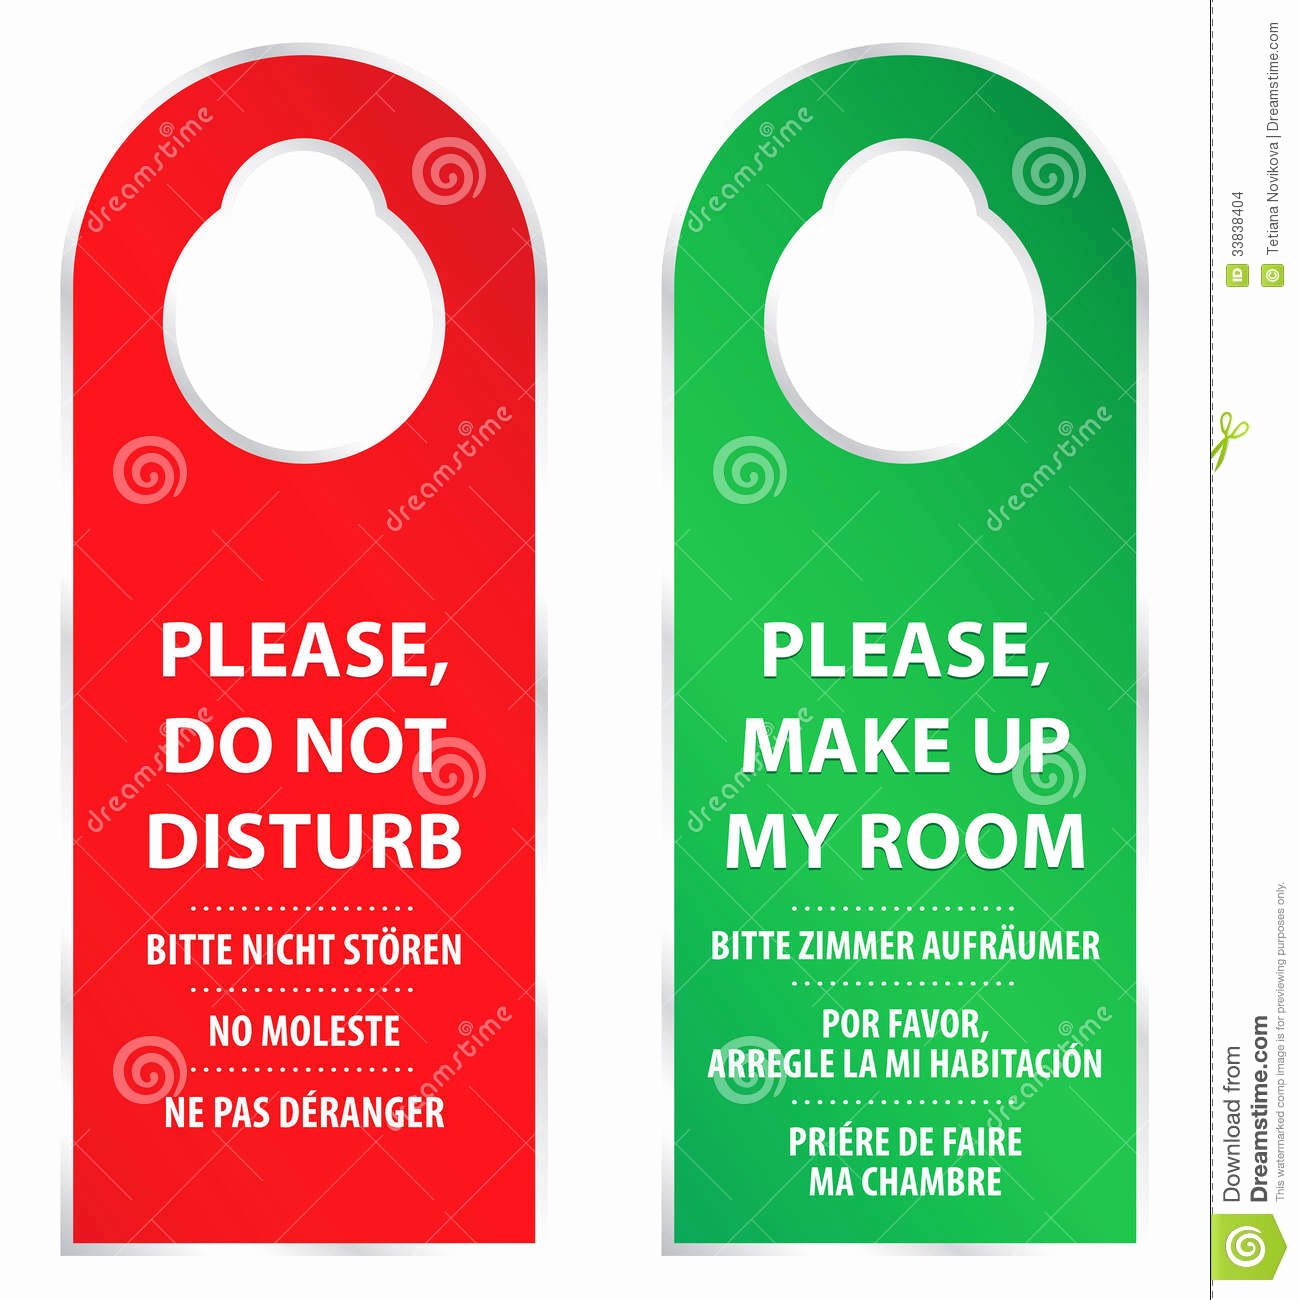 Do Not Disturb Signs Template Elegant Do Not Disturb and Make Up My Room Cards Stock Vector